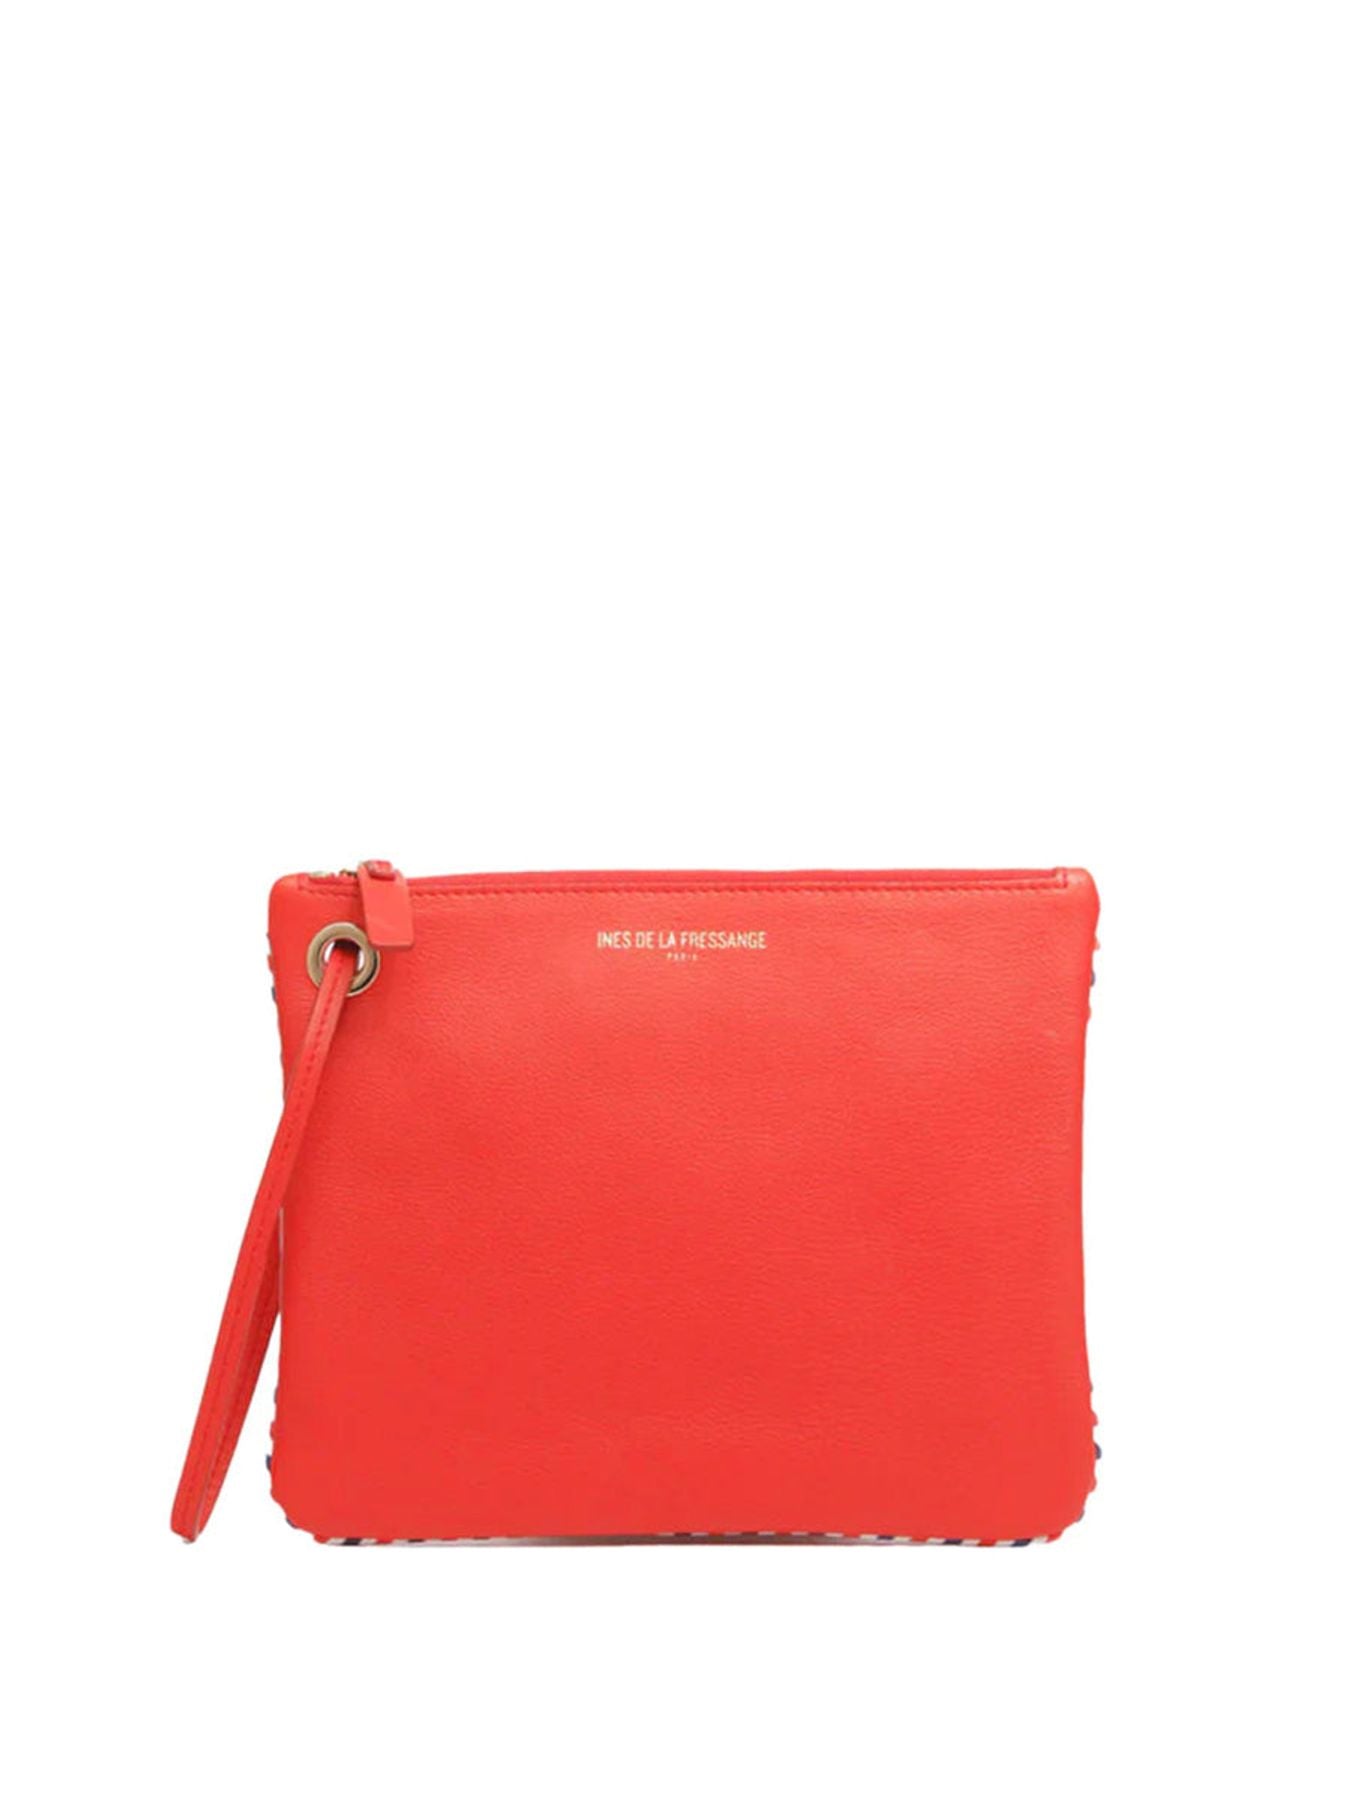 marcia-l-leather-red pouch